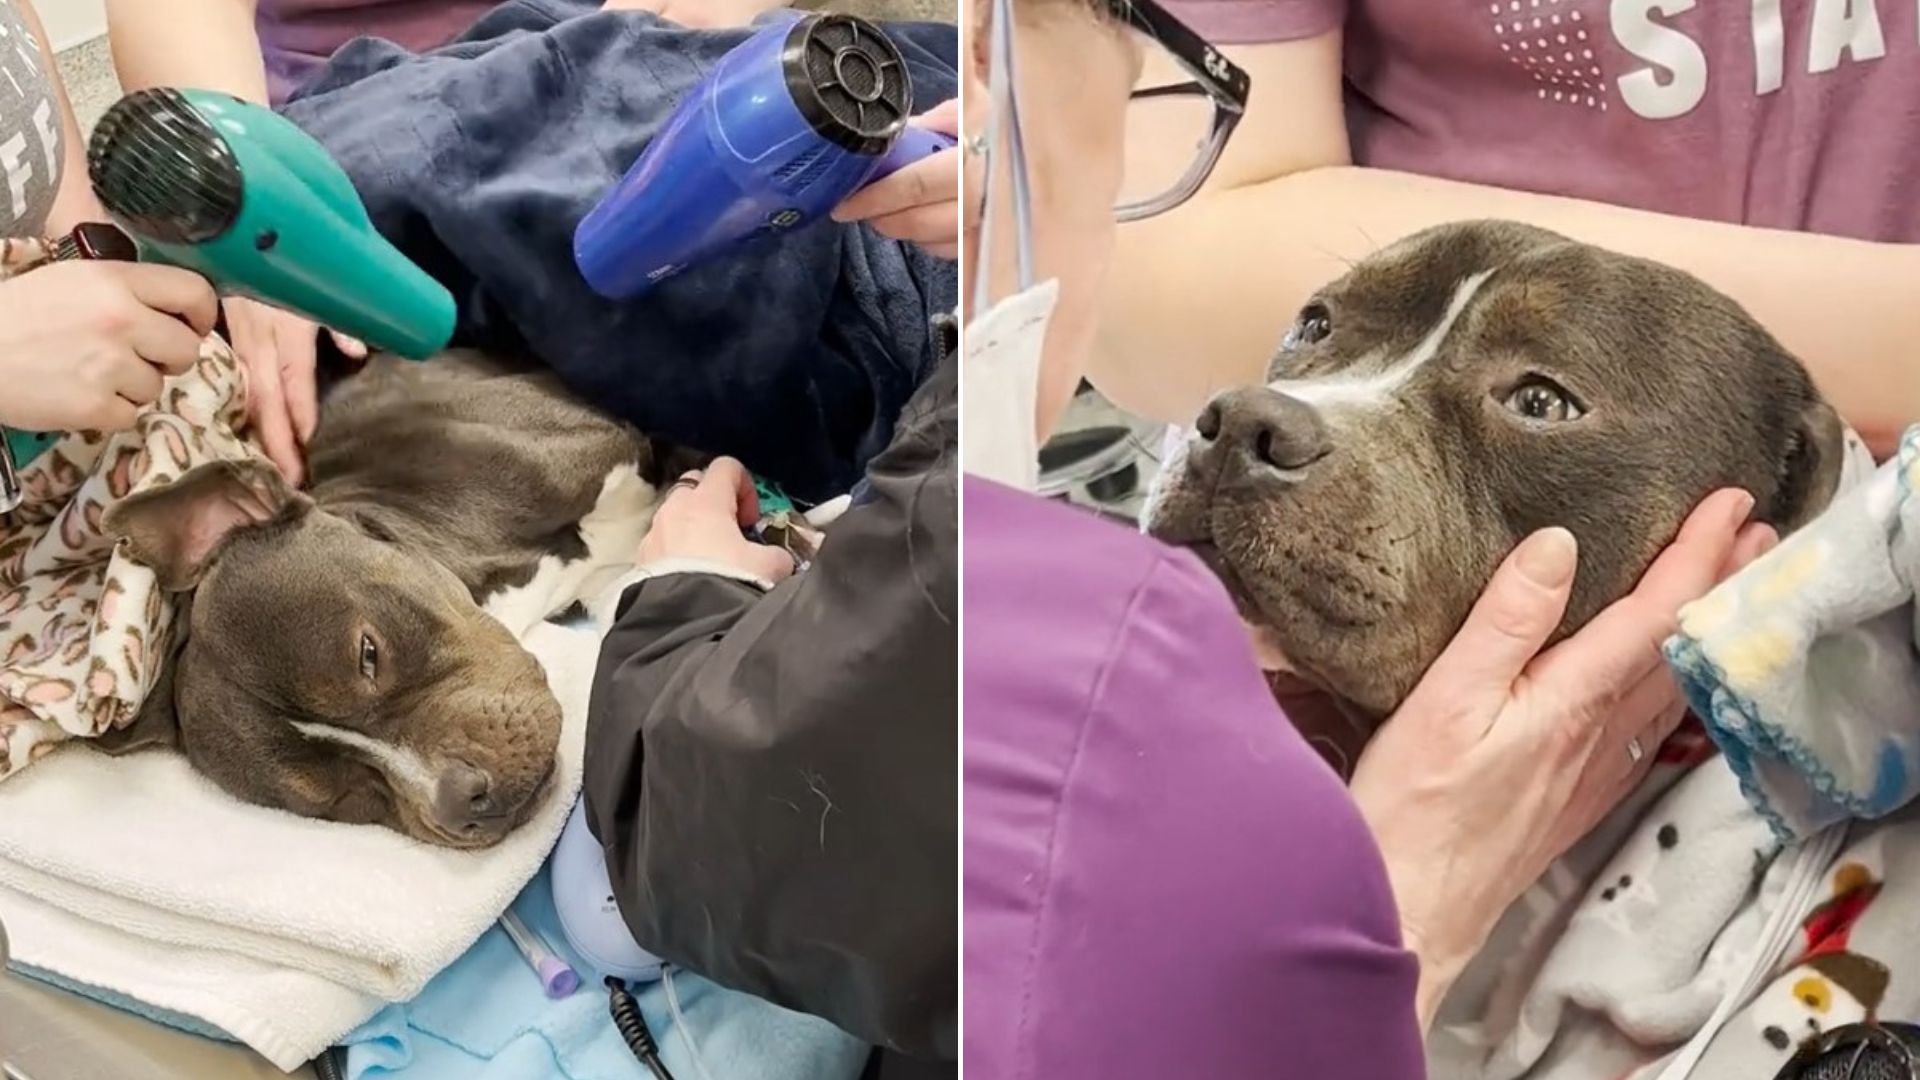 The Vet Team Fights To Revive A Dog Found Frozen And Abandoned During The Coldest Part Of Winter